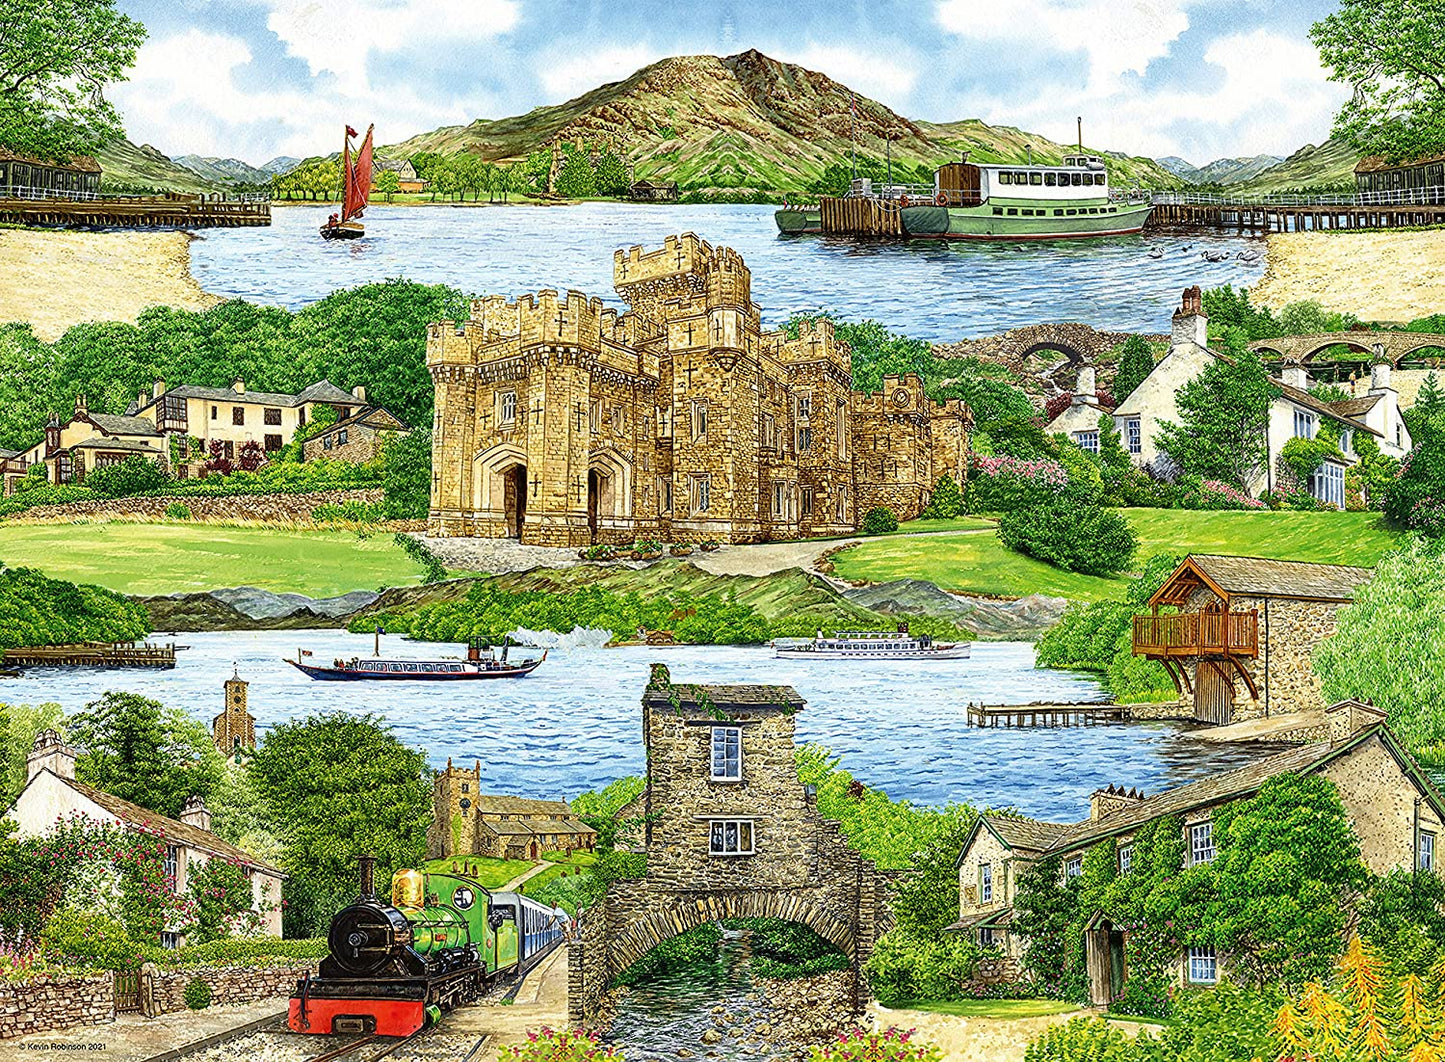 Ravensburger - Escape to The Lake District - 500 Piece Jigsaw Puzzle